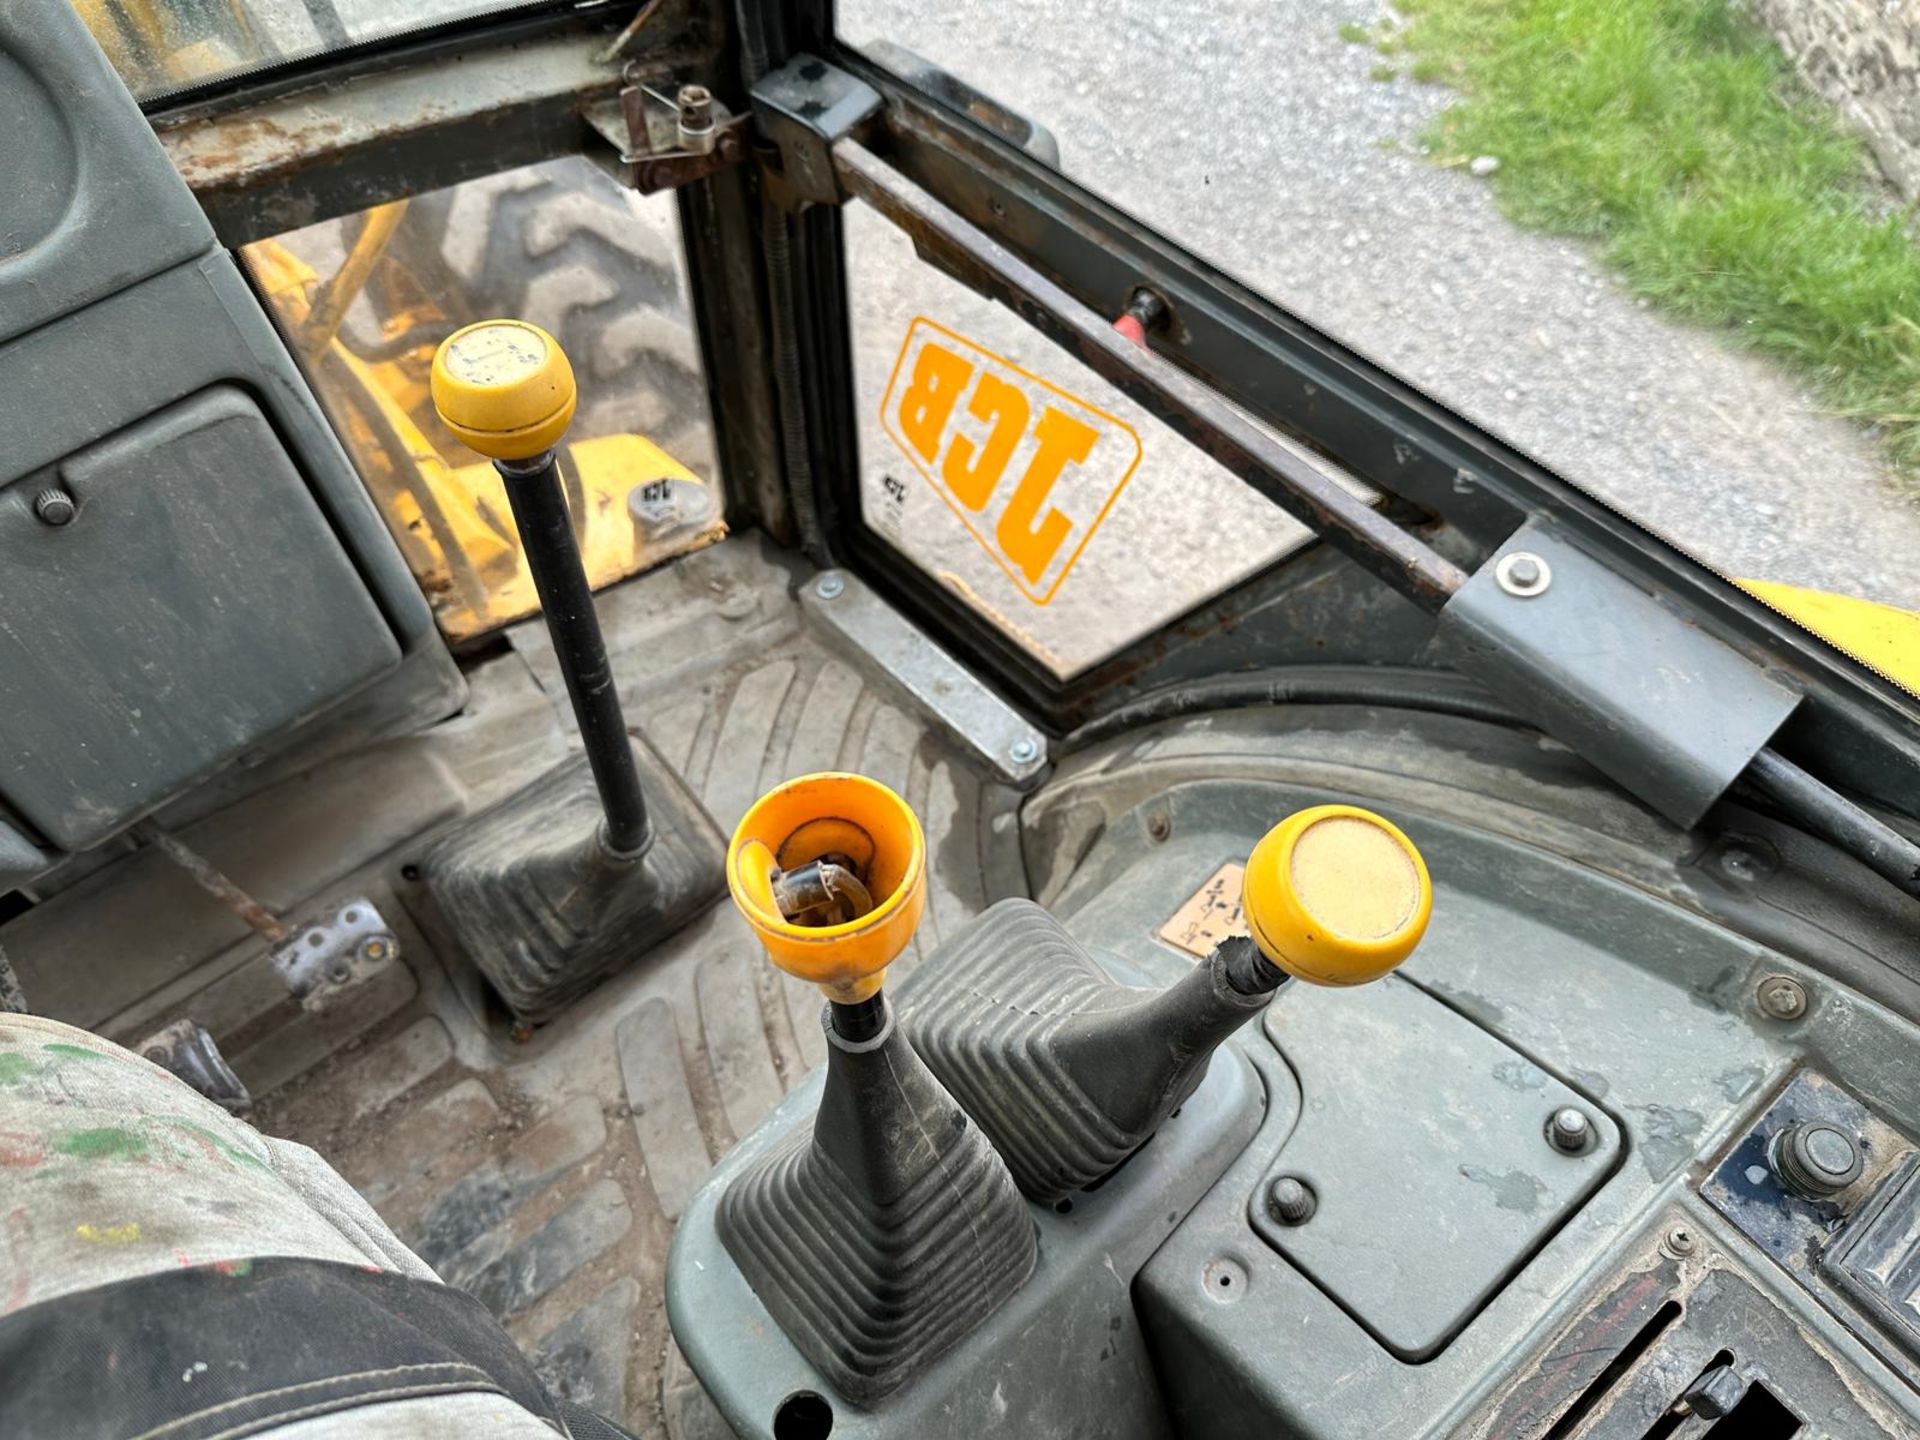 JCB 3CX Sitemaster Wheeled Front Loader Backhoe, Runs Drives Digs And Lifts *PLUS VAT* - Image 12 of 29